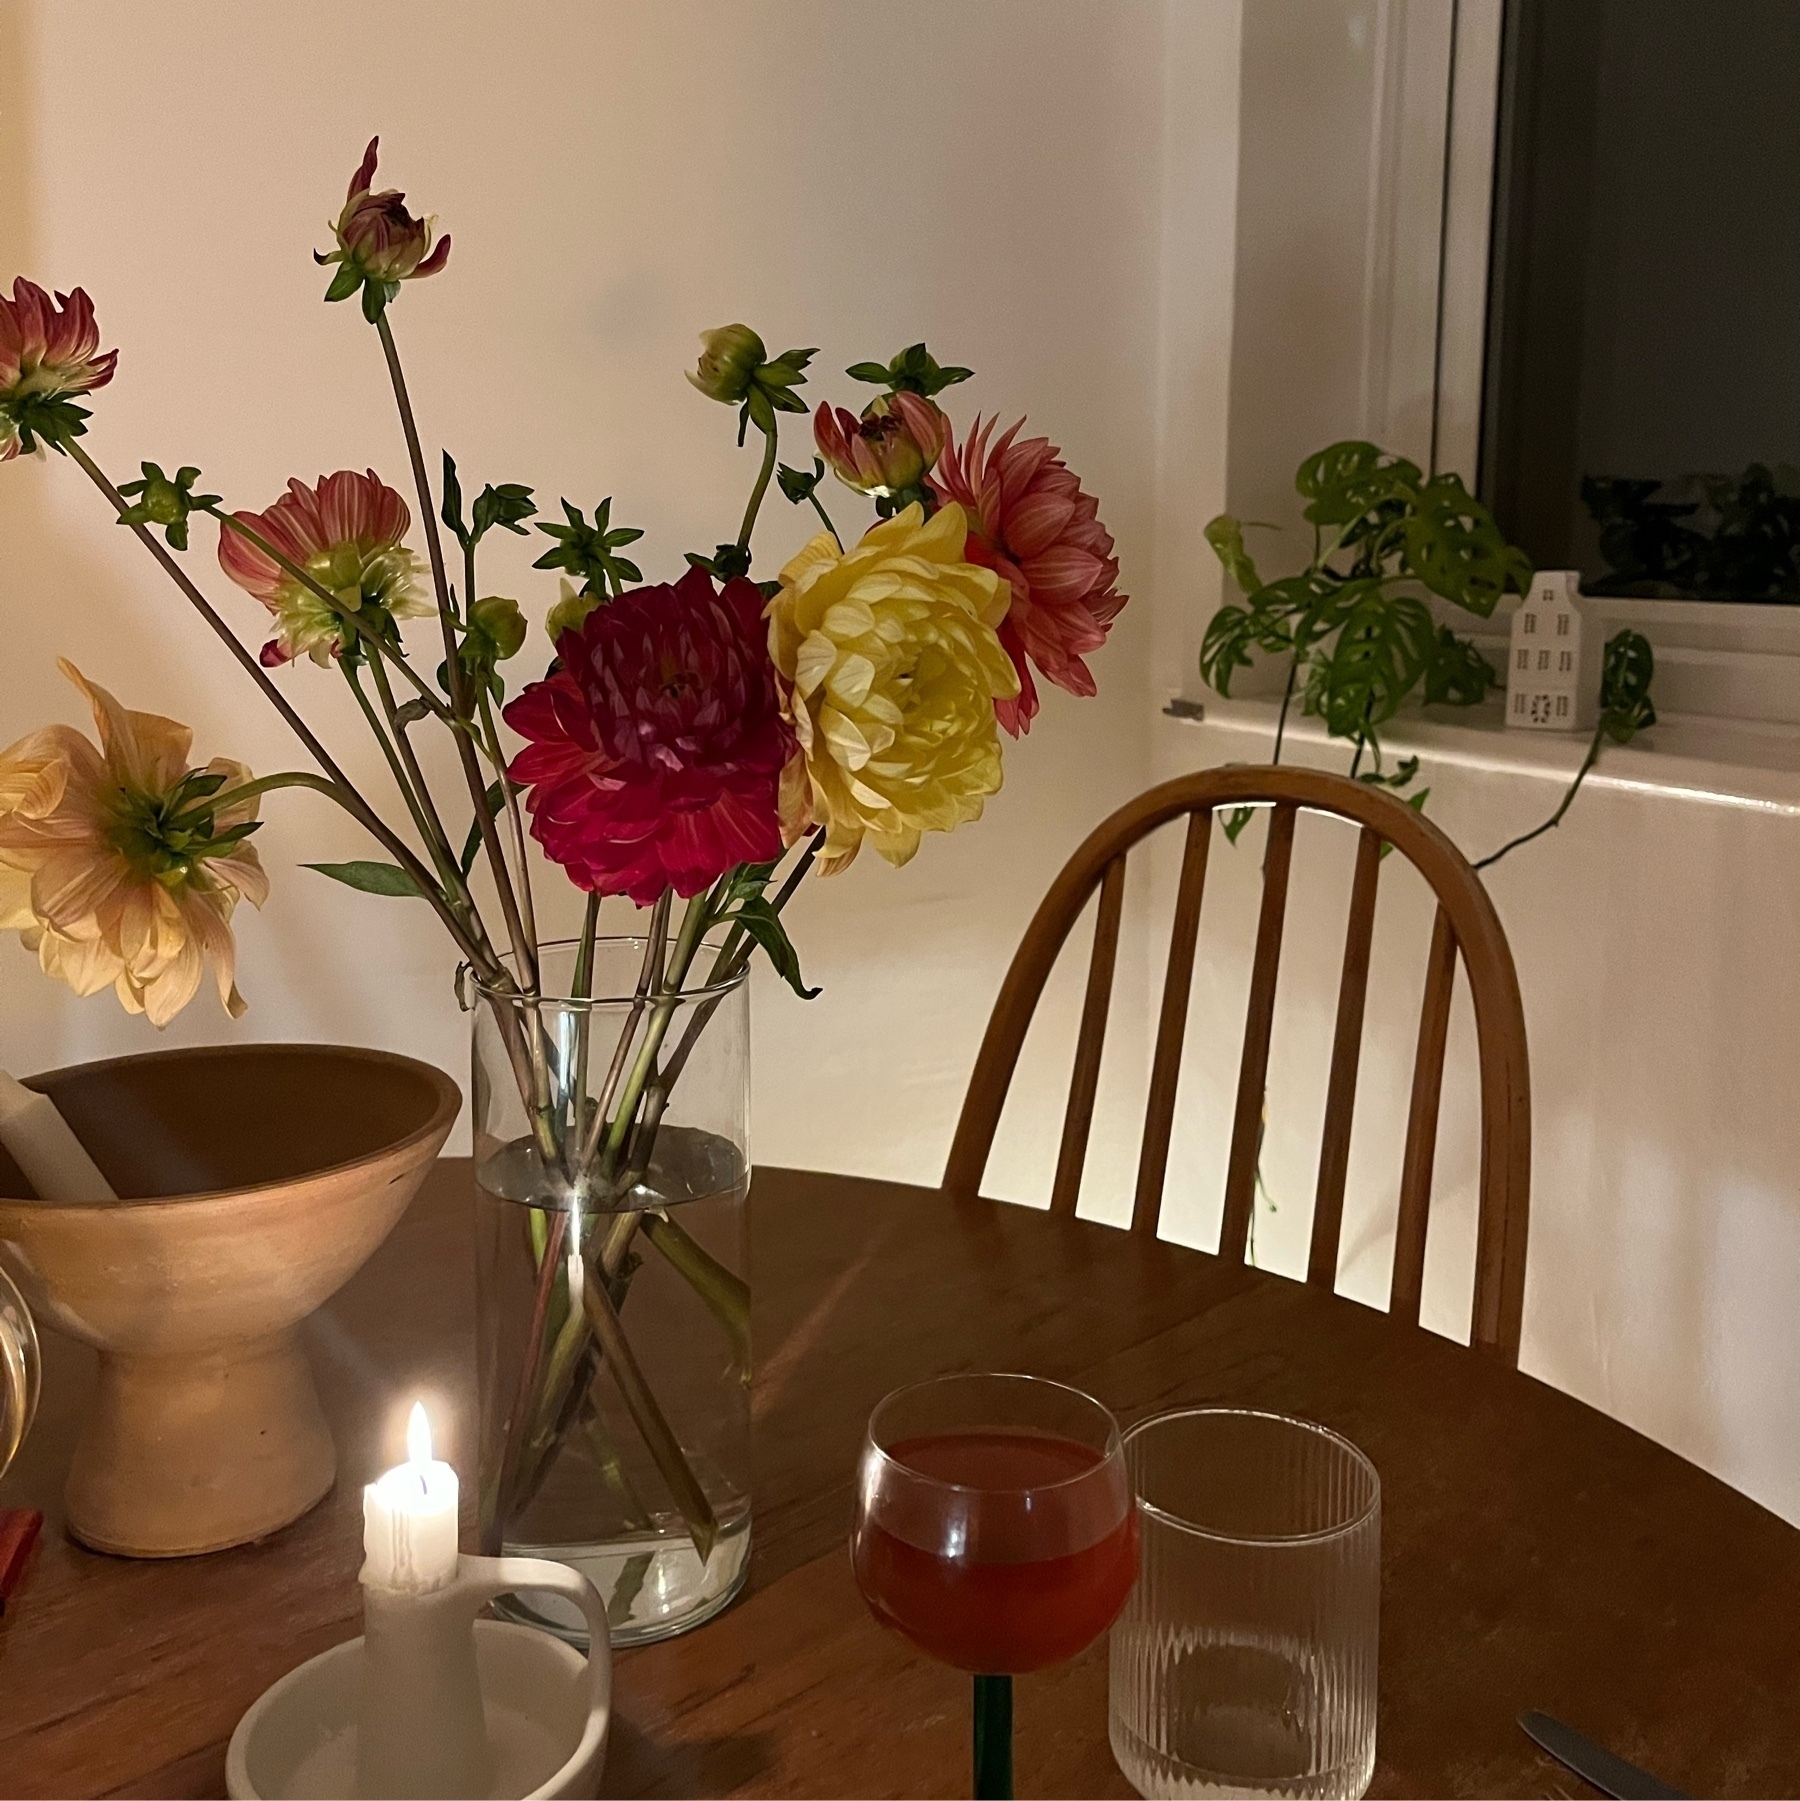 Dahlias on a vase on top of a brown table next to a candle burning and a glass of red wine.